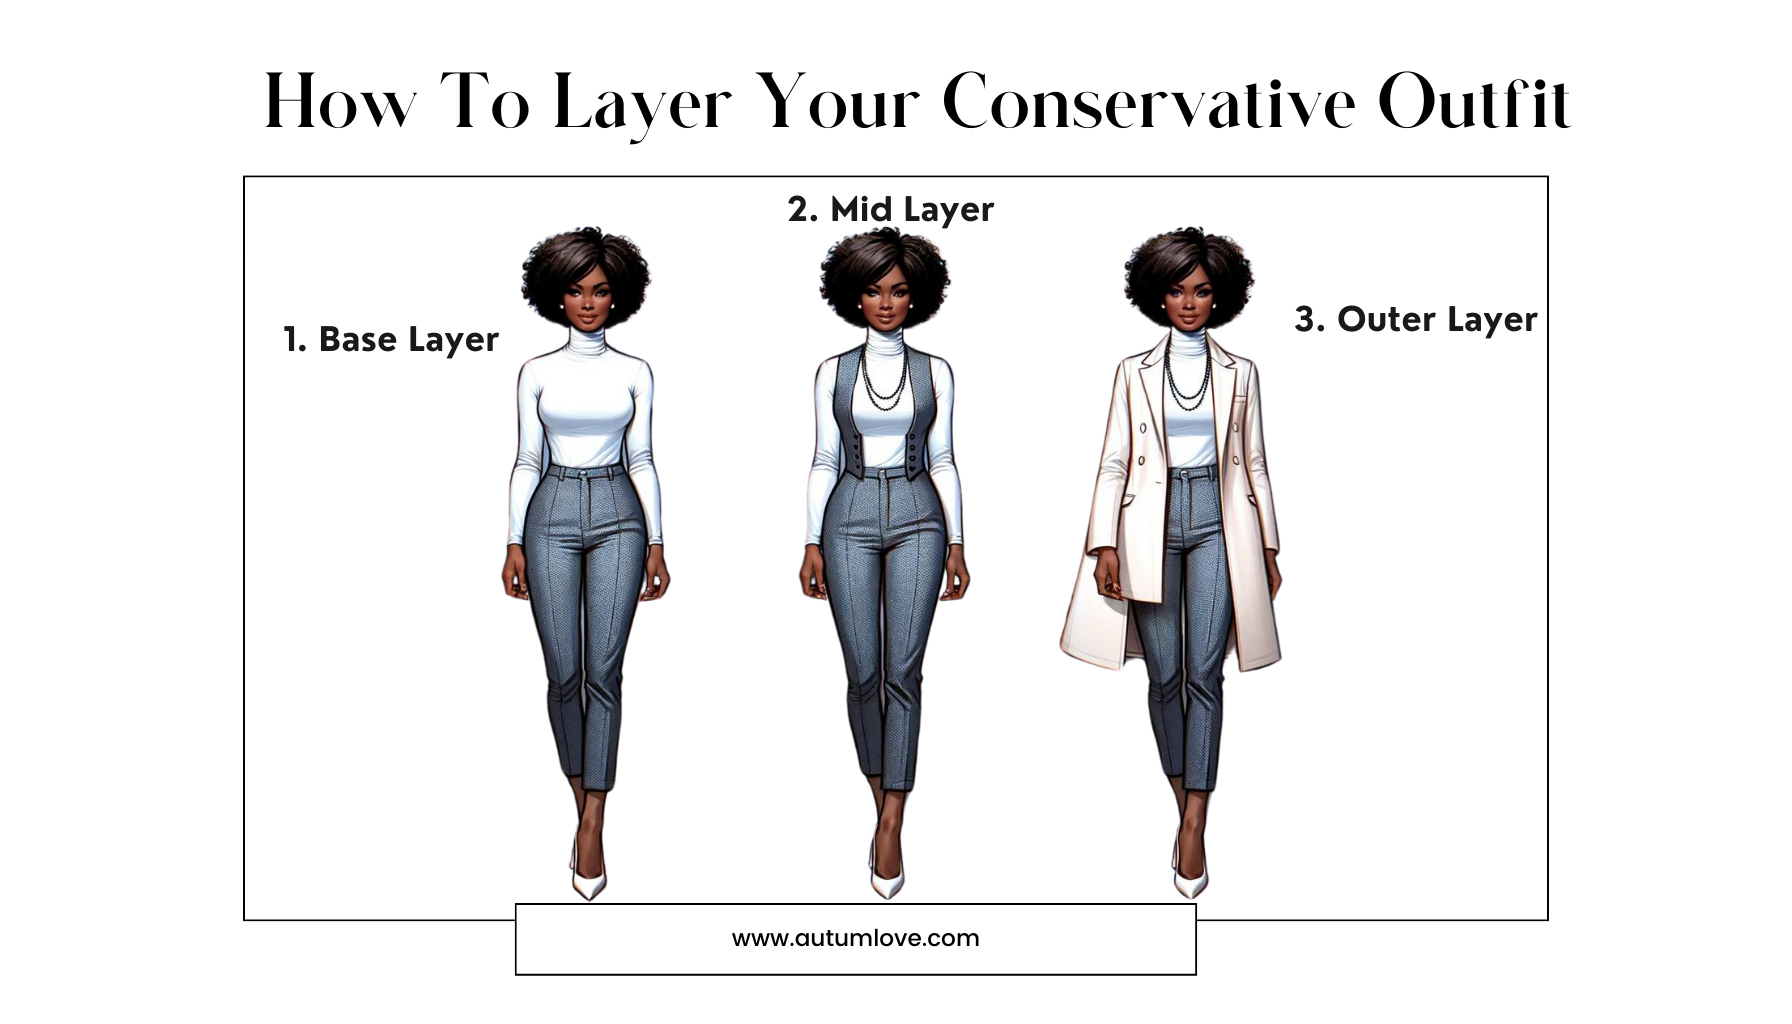 6 Must-Have Conservative Clothing When Travelling